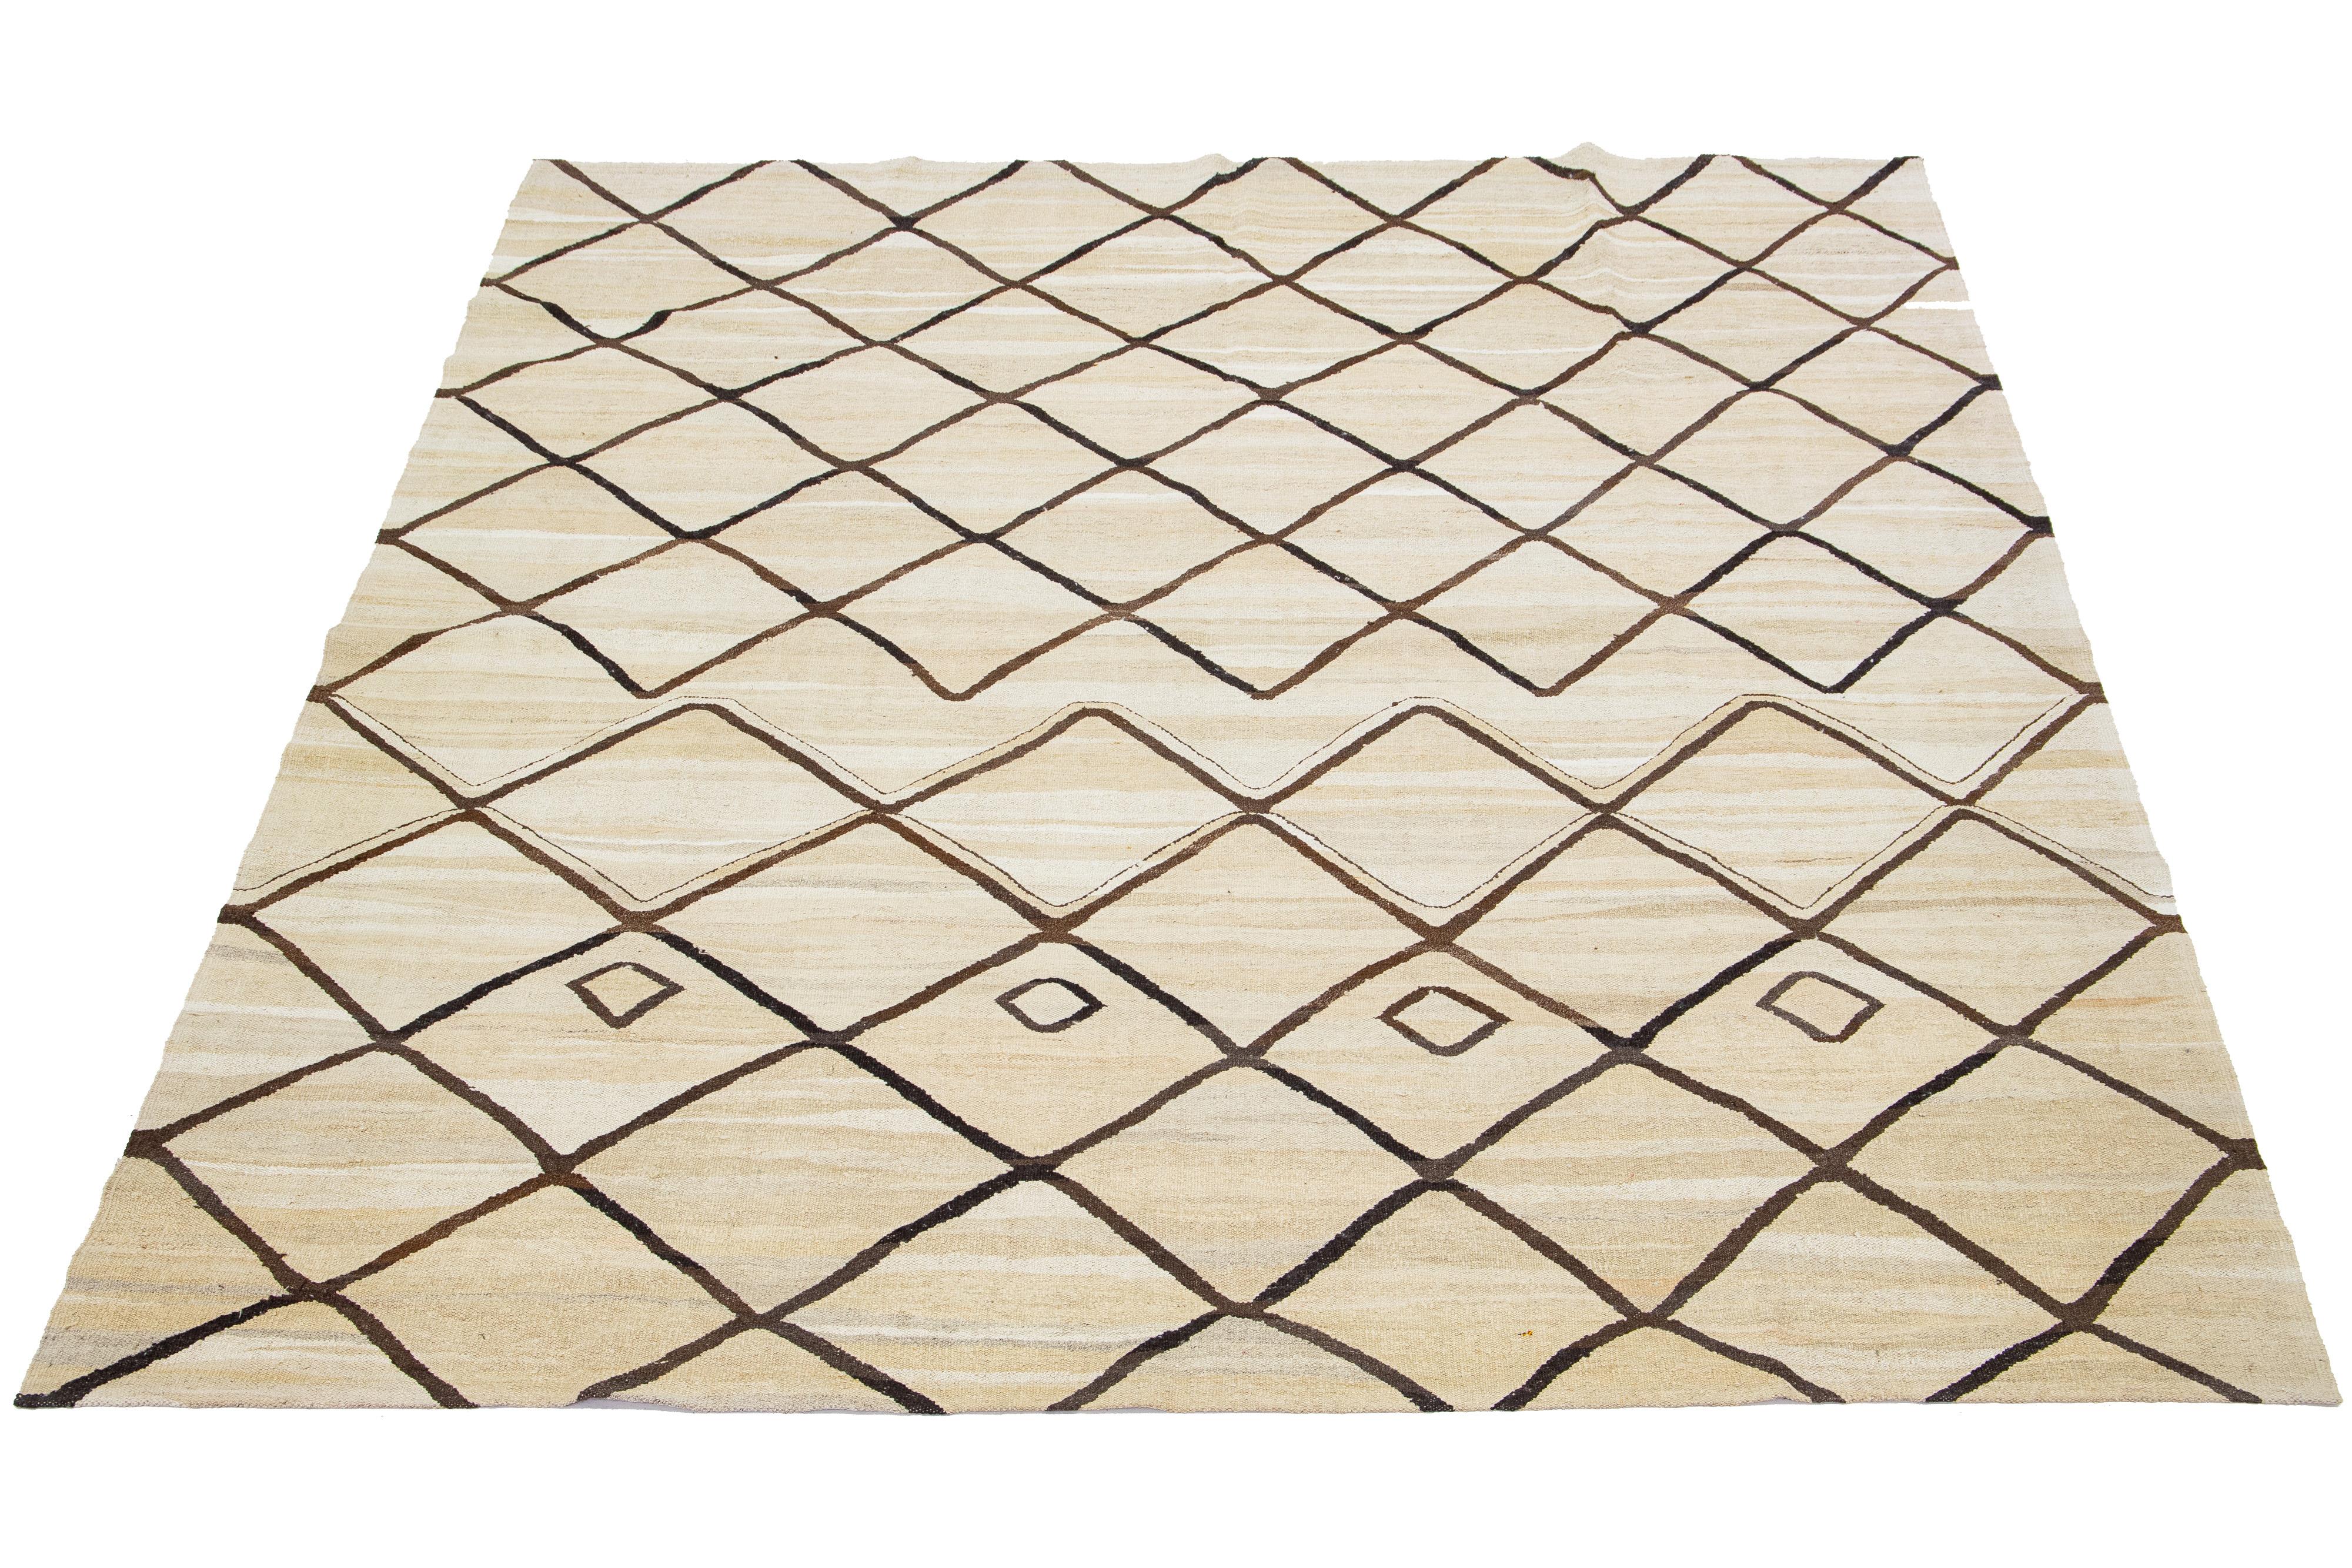 This hand-knotted modern flat-weave Kilim wool rug is beautifully crafted. It features a beige field with an all-over geometric design in brown.

This rug measures 8'7